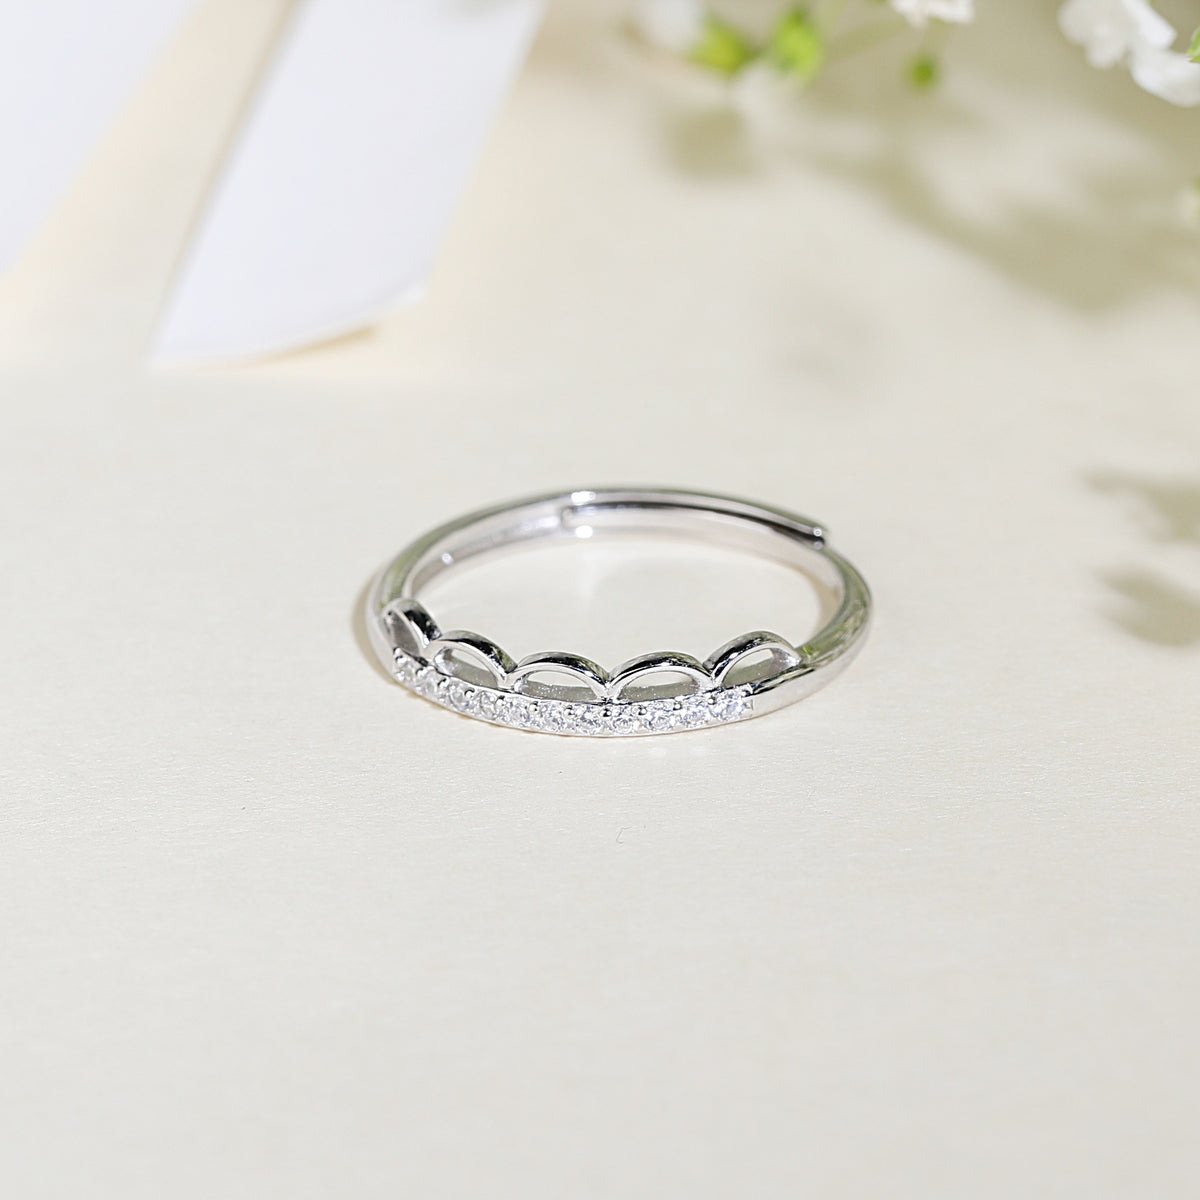 Silver Wave Design Ring With Adjustable Size